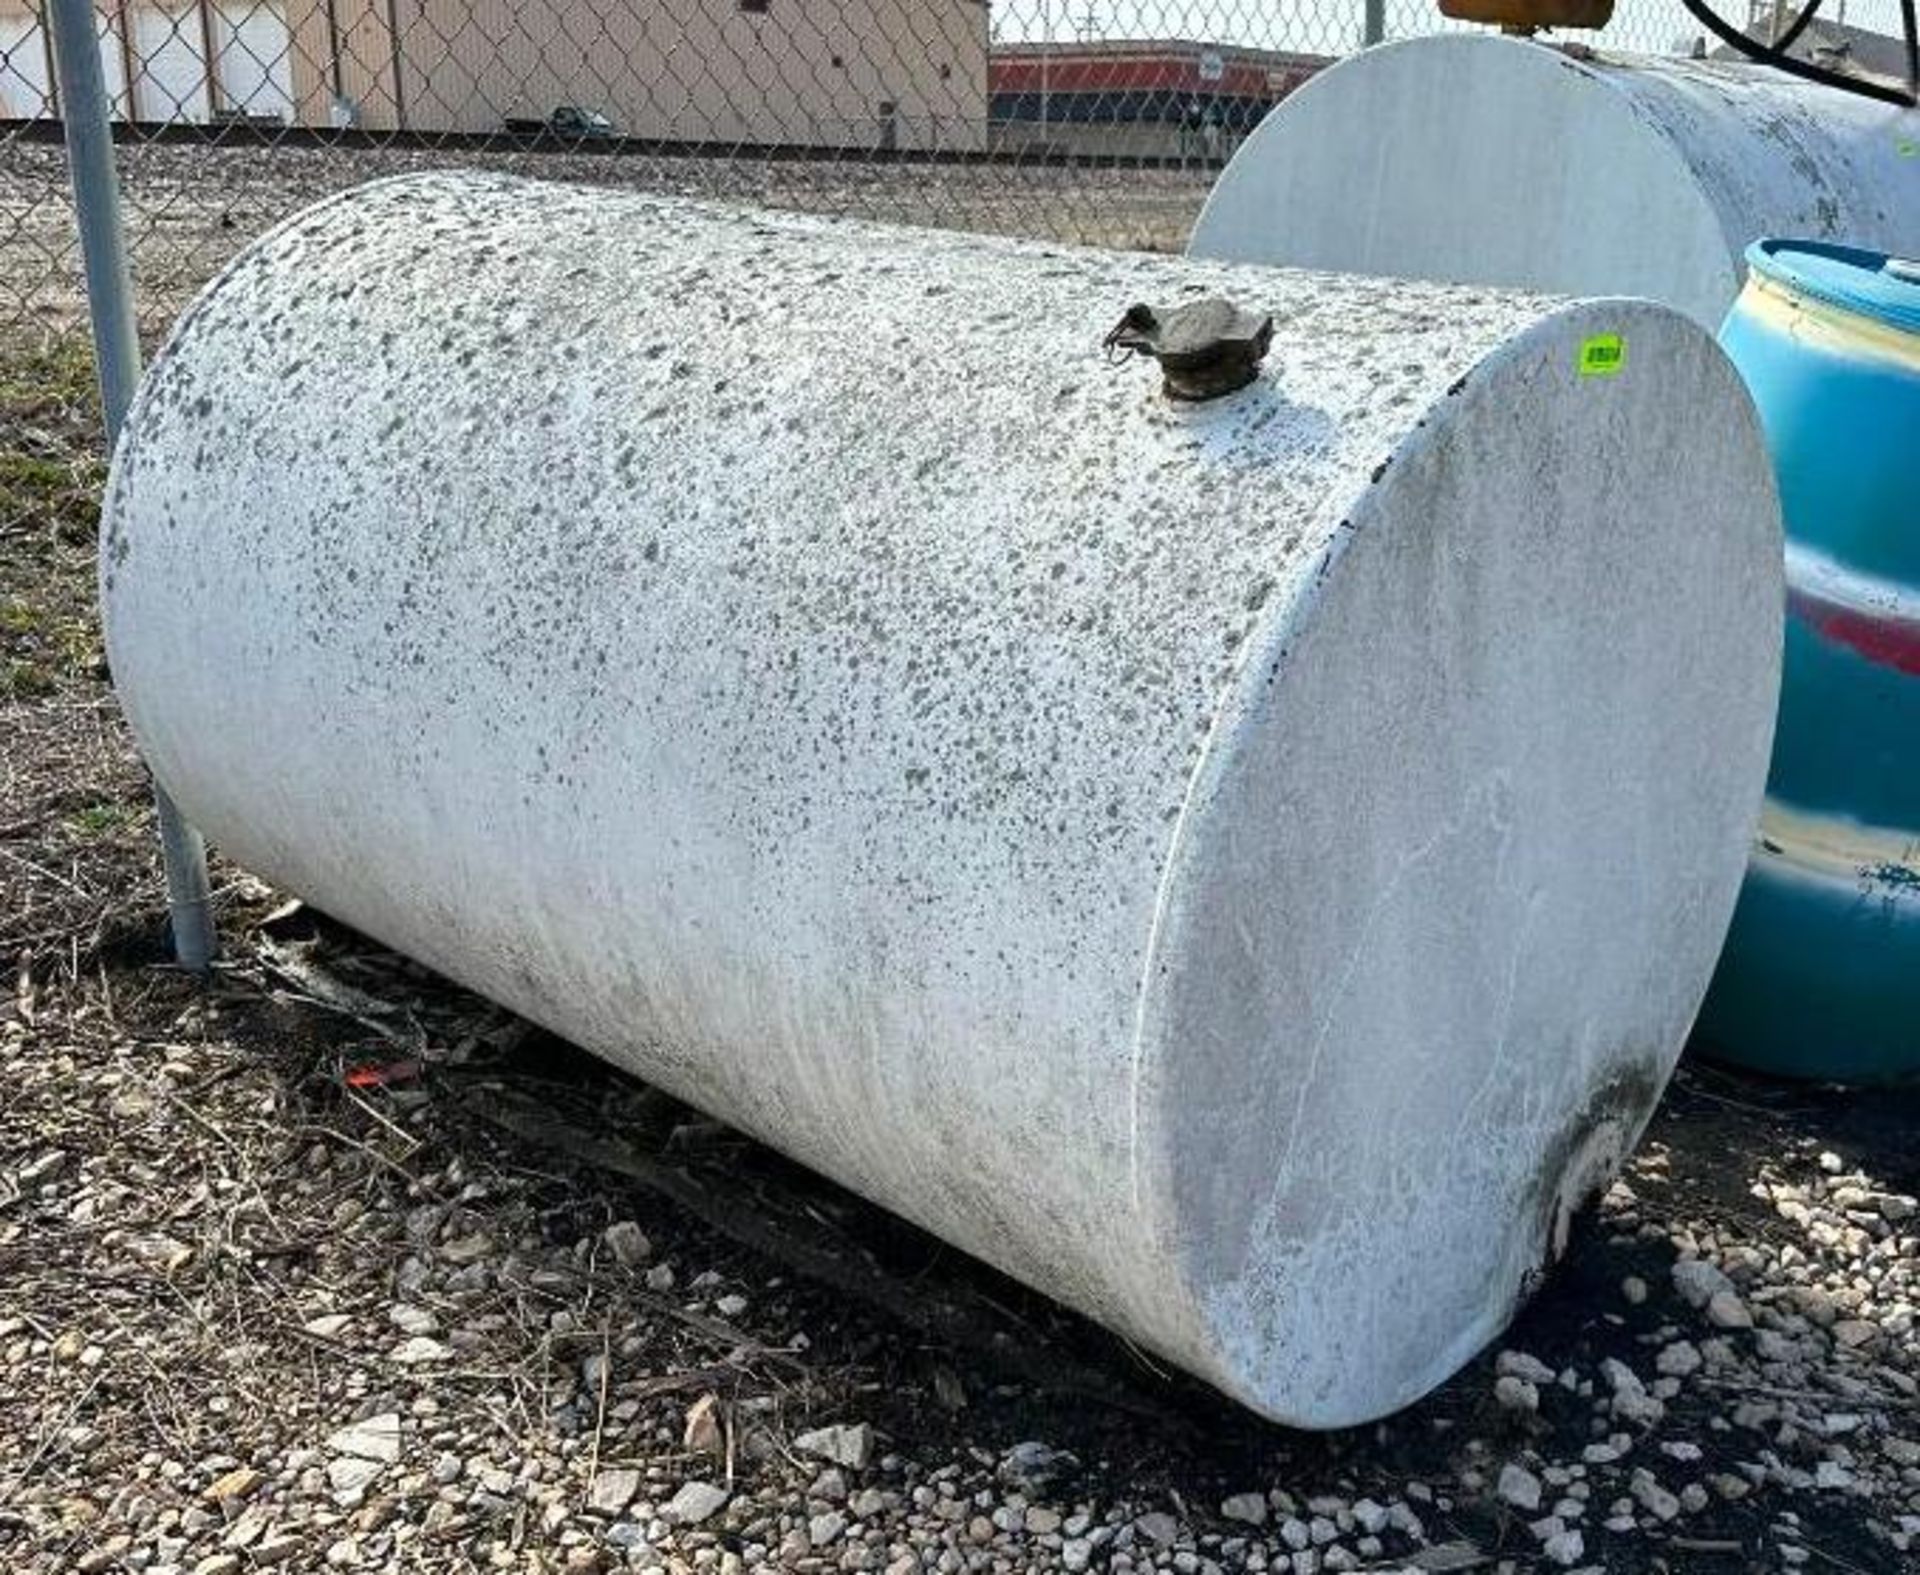 60" X 36" METAL FUEL TANK INFORMATION: DIESEL FUEL WAS STORED IN THIS TANK SIZE: 60" X 36" LOCATION: